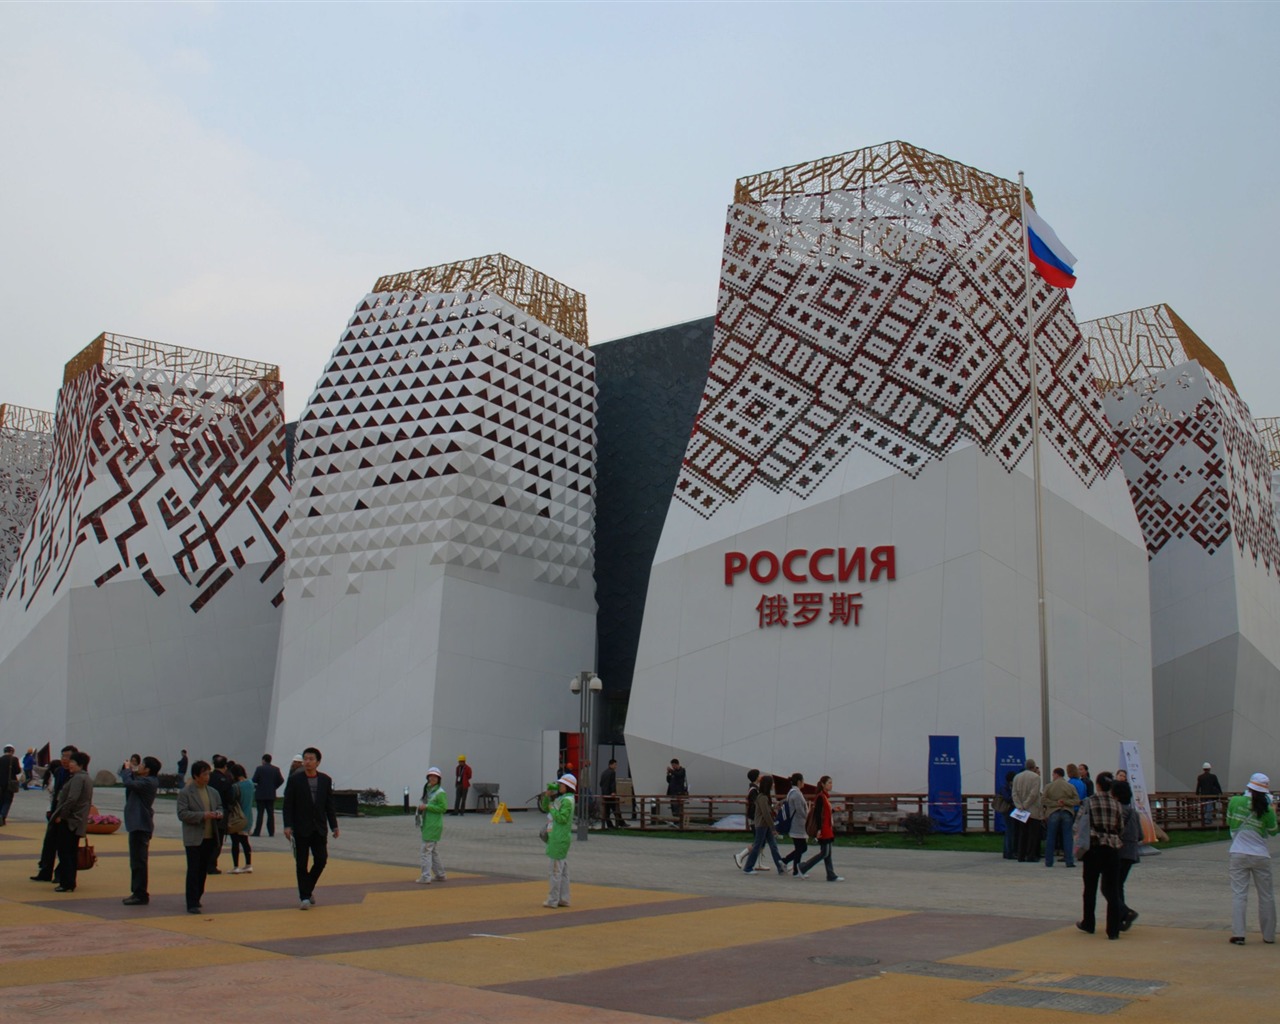 Commissioning of the 2010 Shanghai World Expo (studious works) #20 - 1280x1024